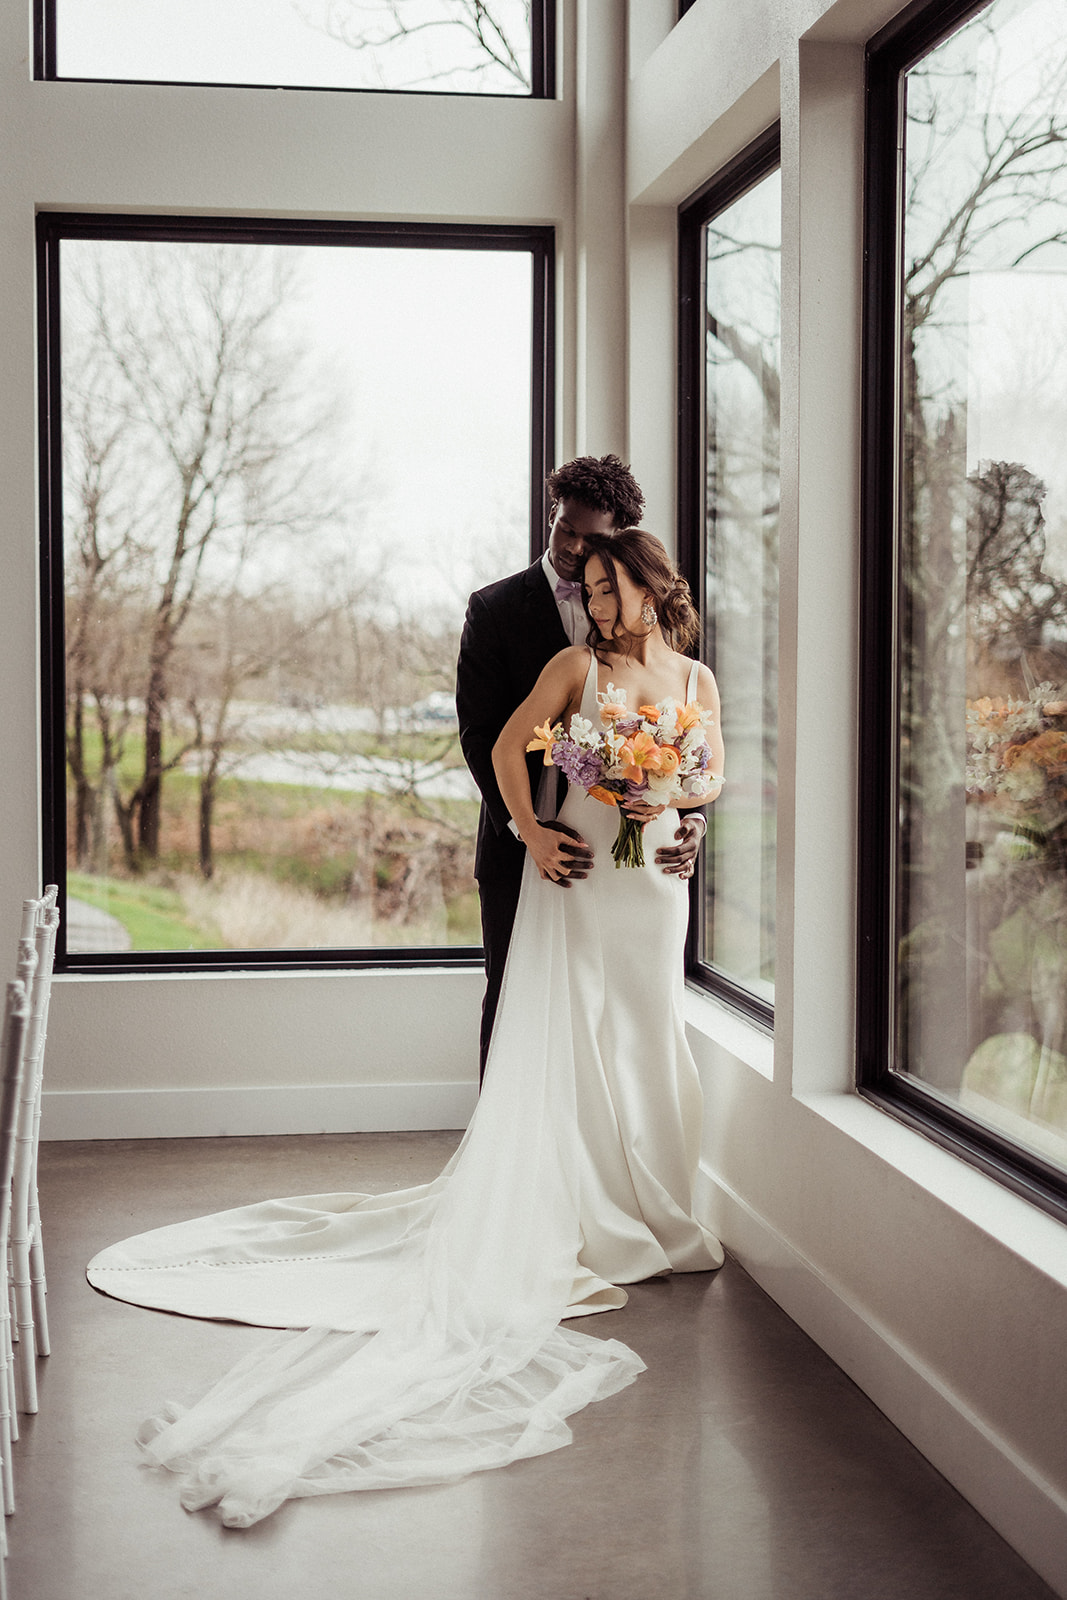 Arkansas styled wedding photography at Osage House with Ash Floral Co, wedding portraits by Tanner Burge Photography